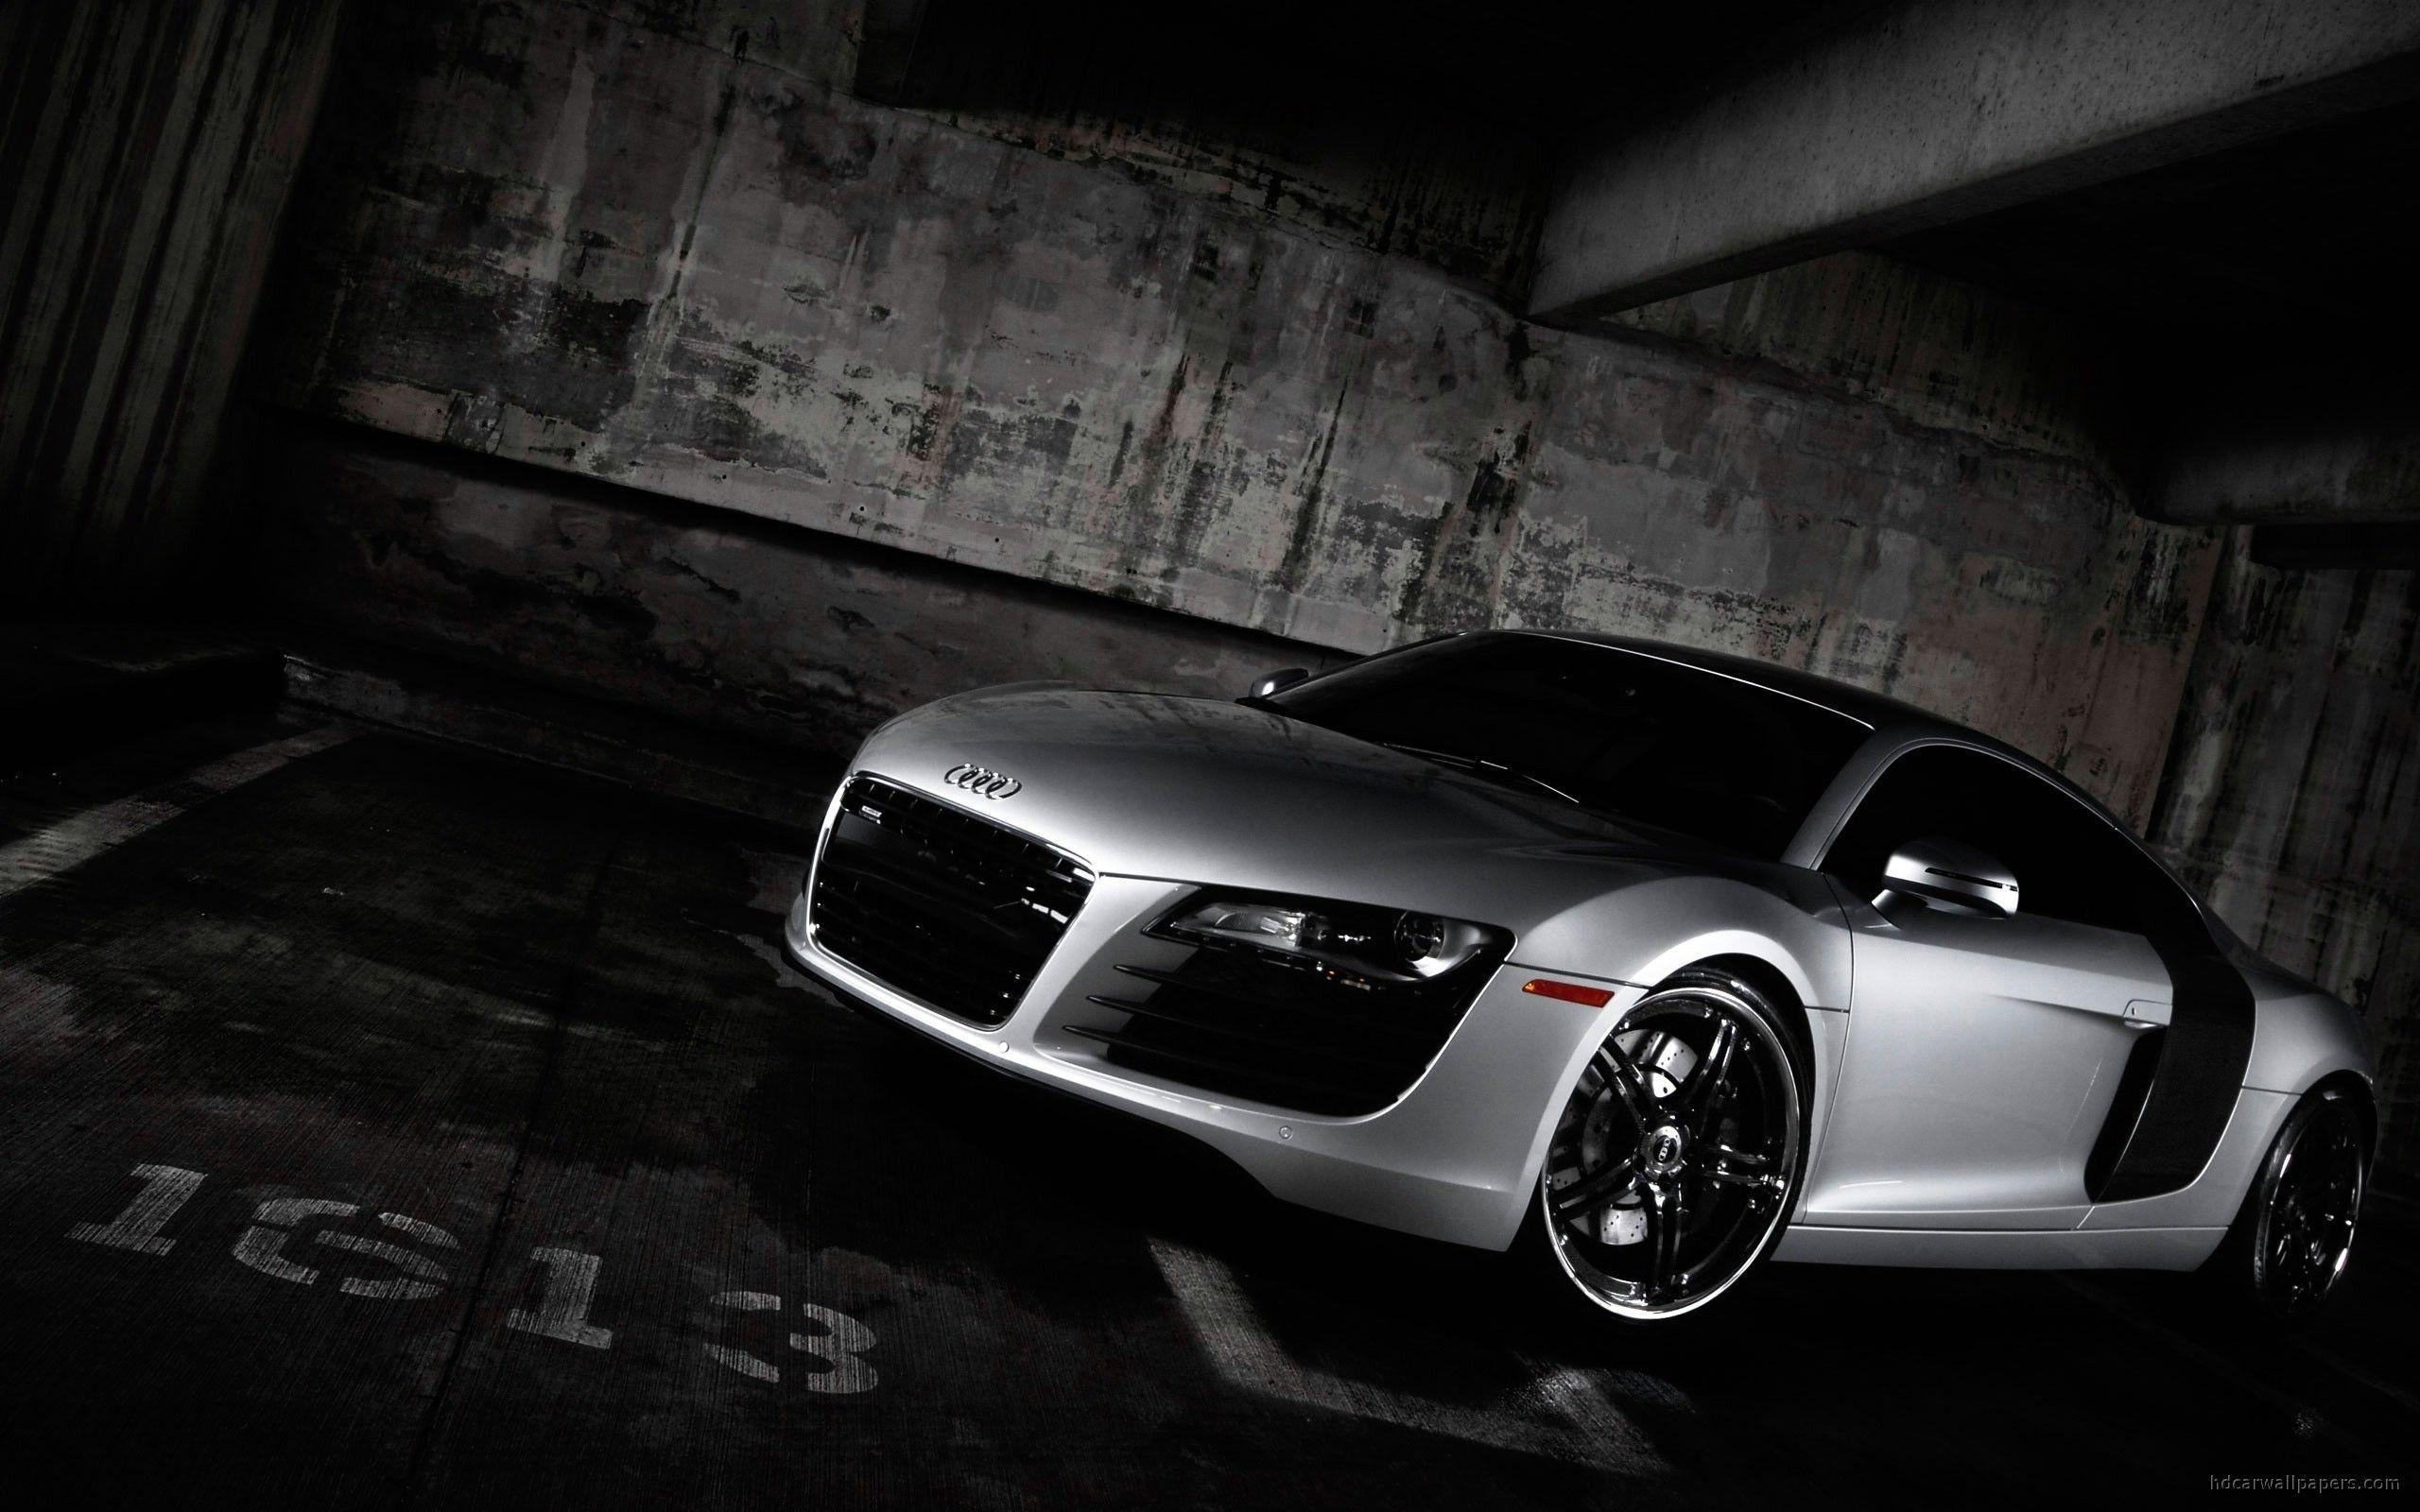 Nothing found for Audi R8 Wallpaper Black Cars Wallpaper